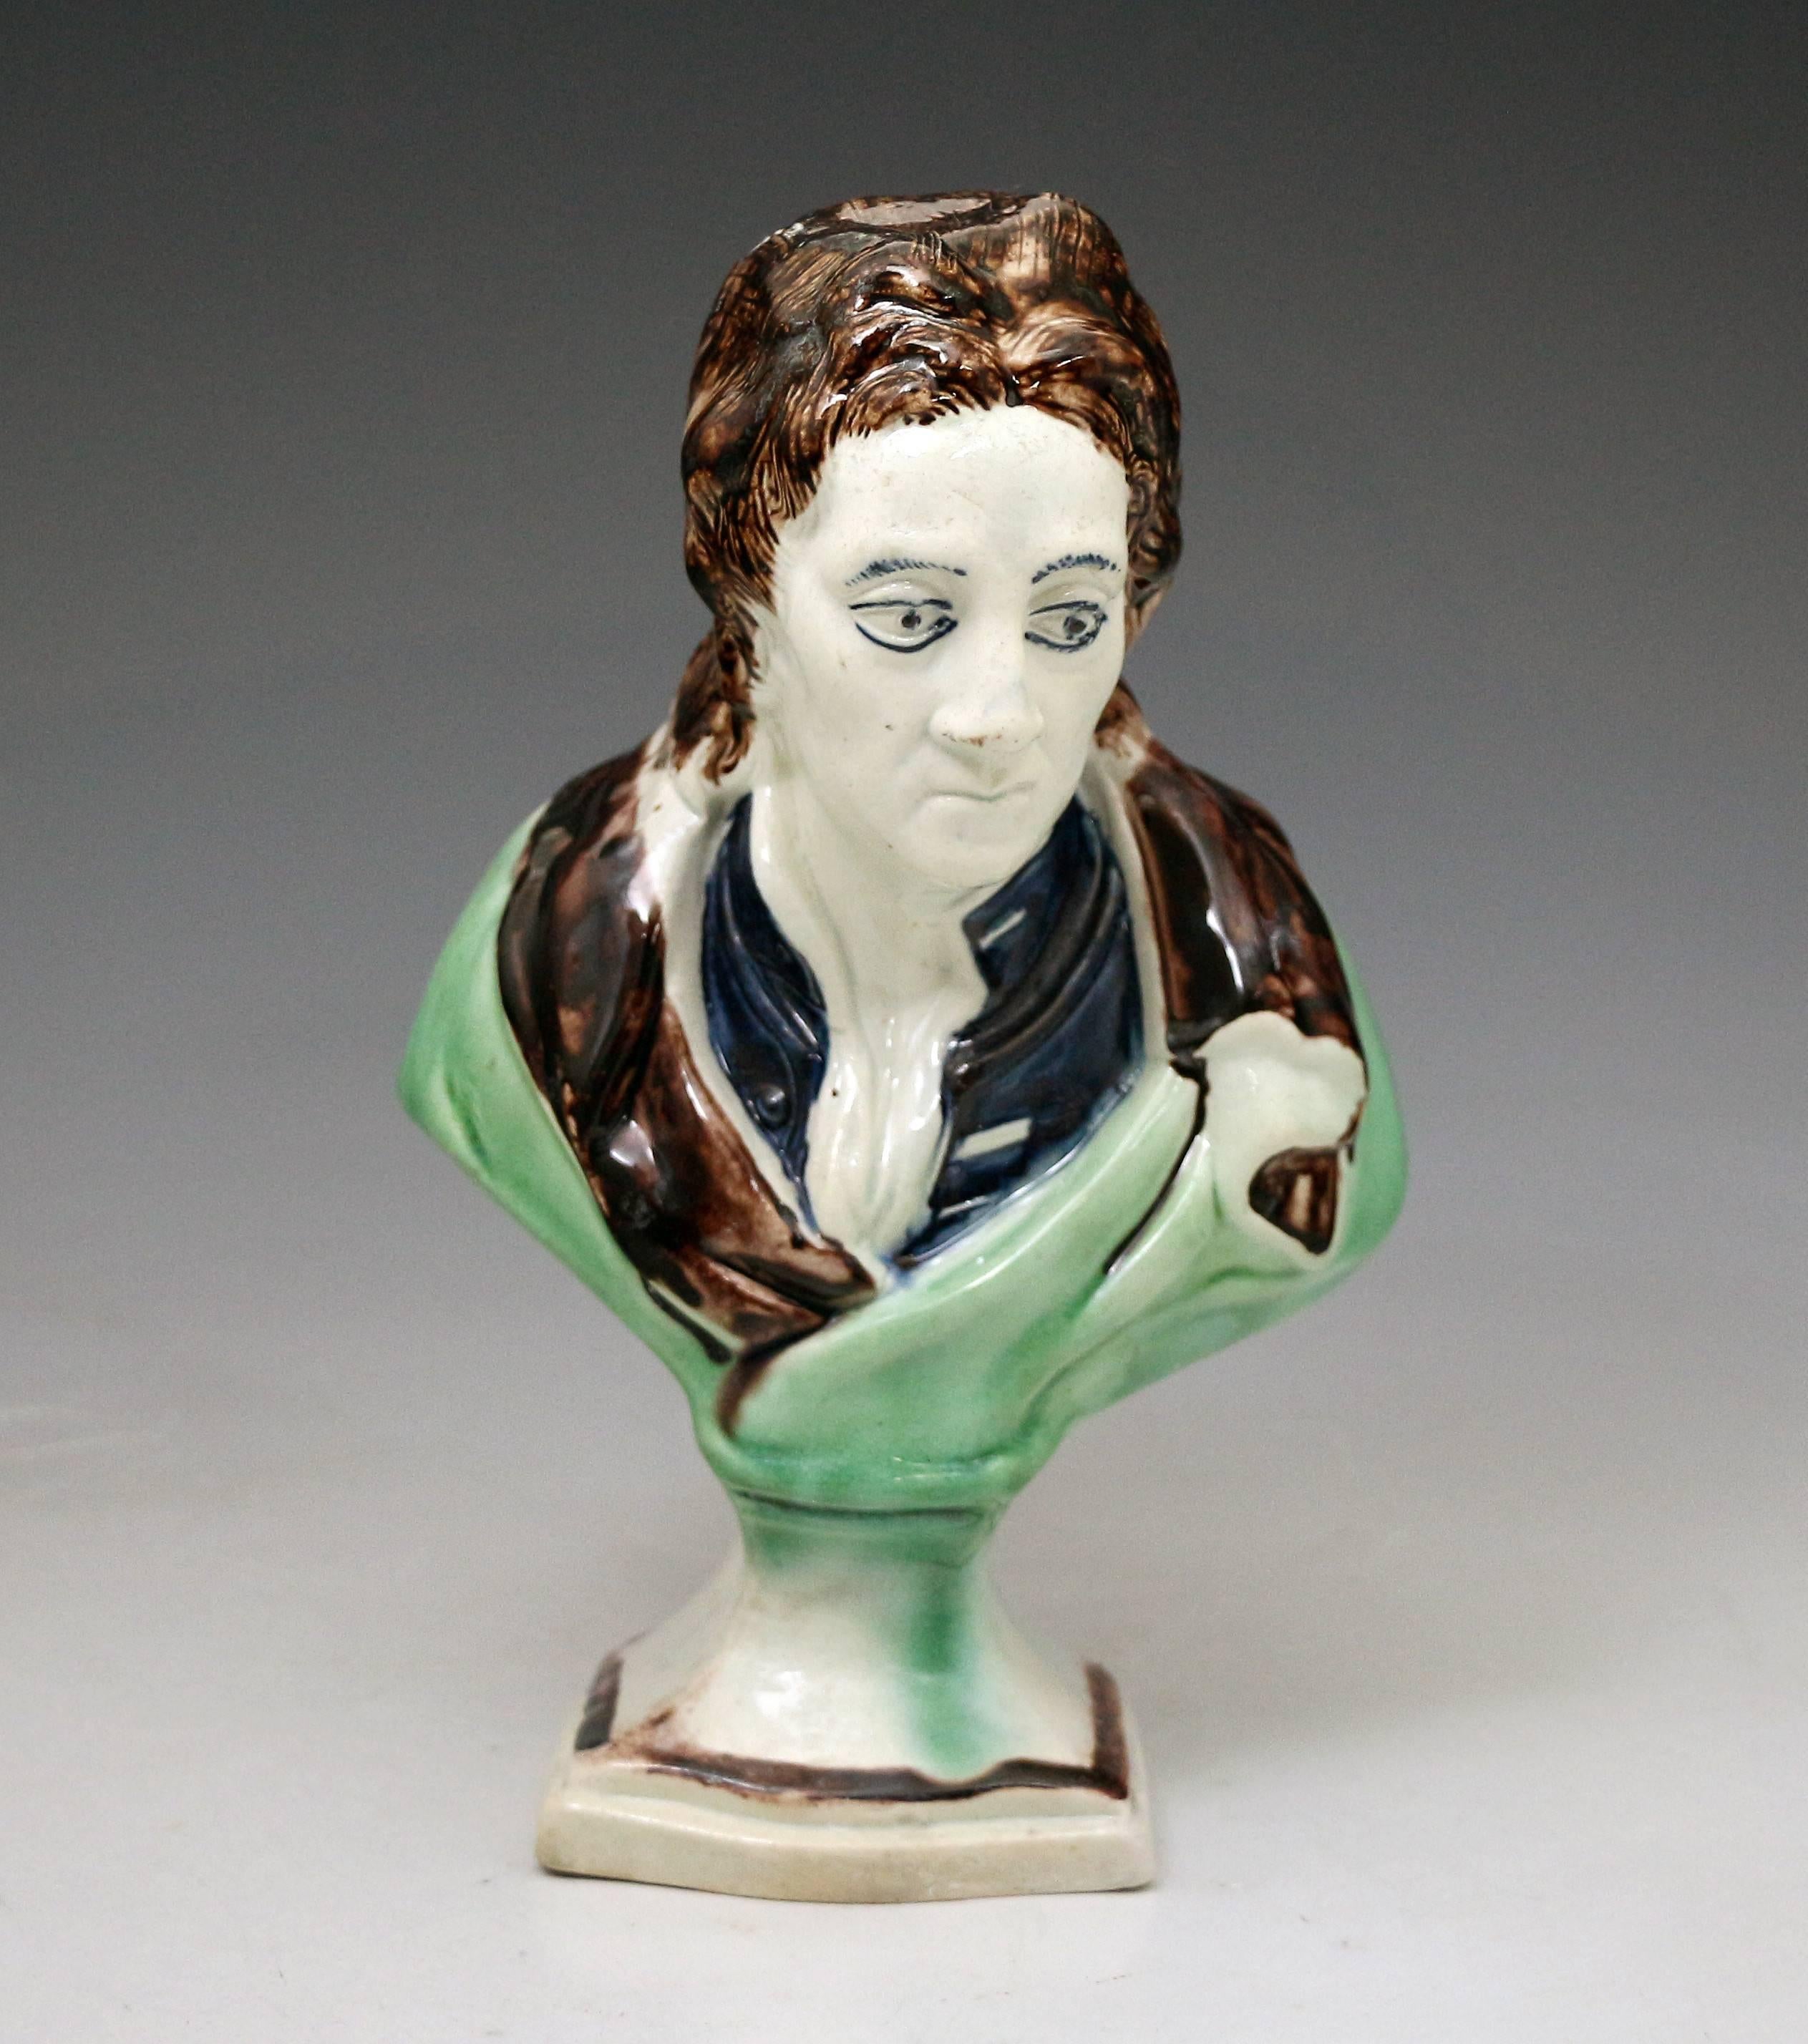 Antique pottery bust in colored glazes in the Ralph Wood fashion of the English poet "John Milton".